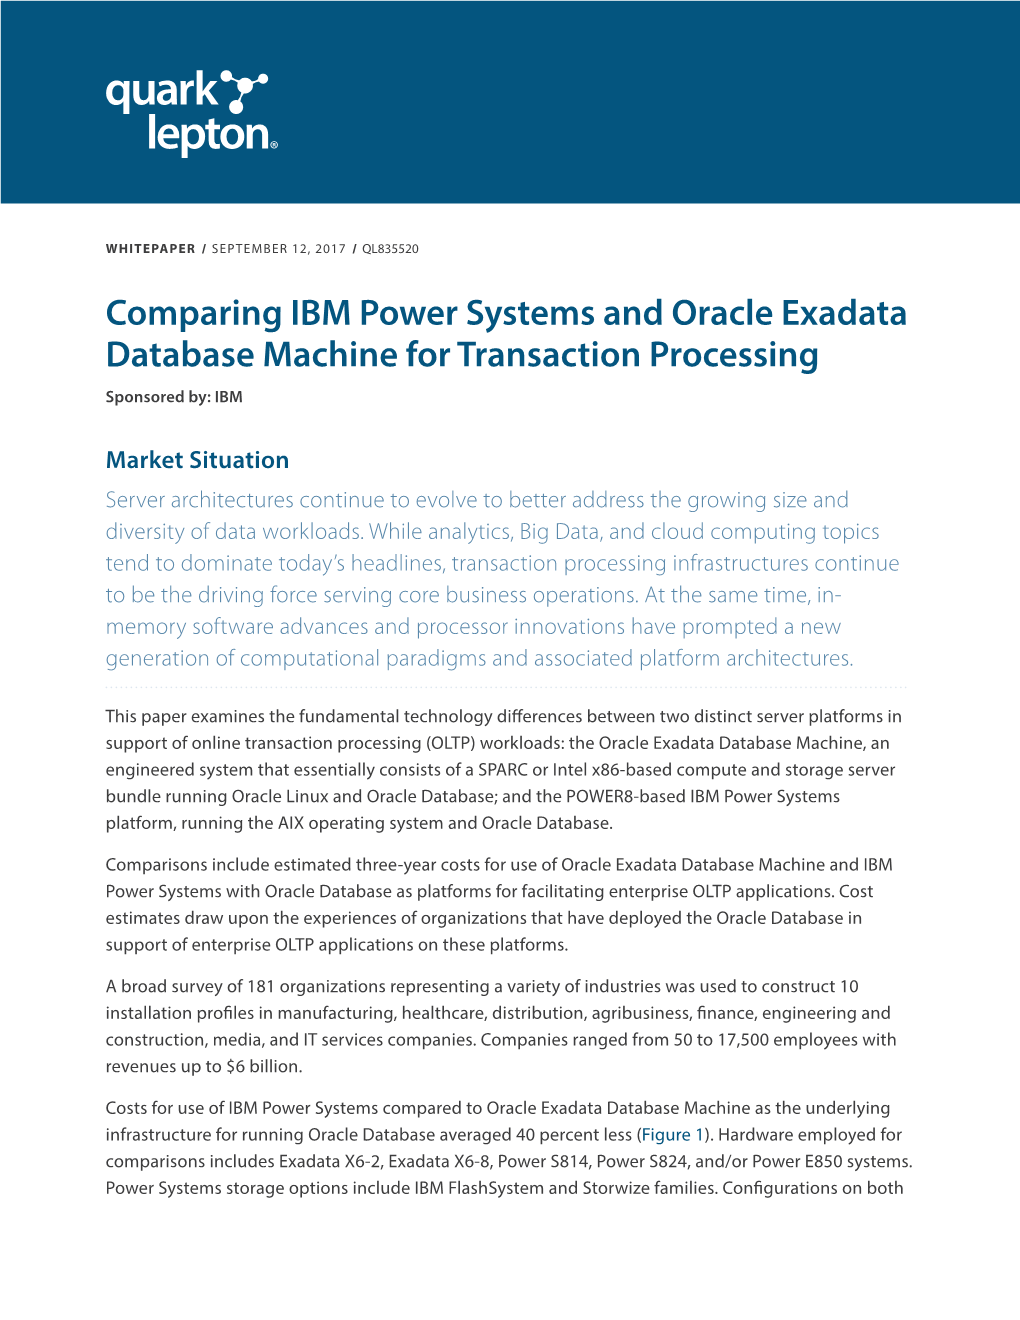 Comparing IBM Power Systems and Oracle Exadata Database Machine for Transaction Processing Sponsored By: IBM